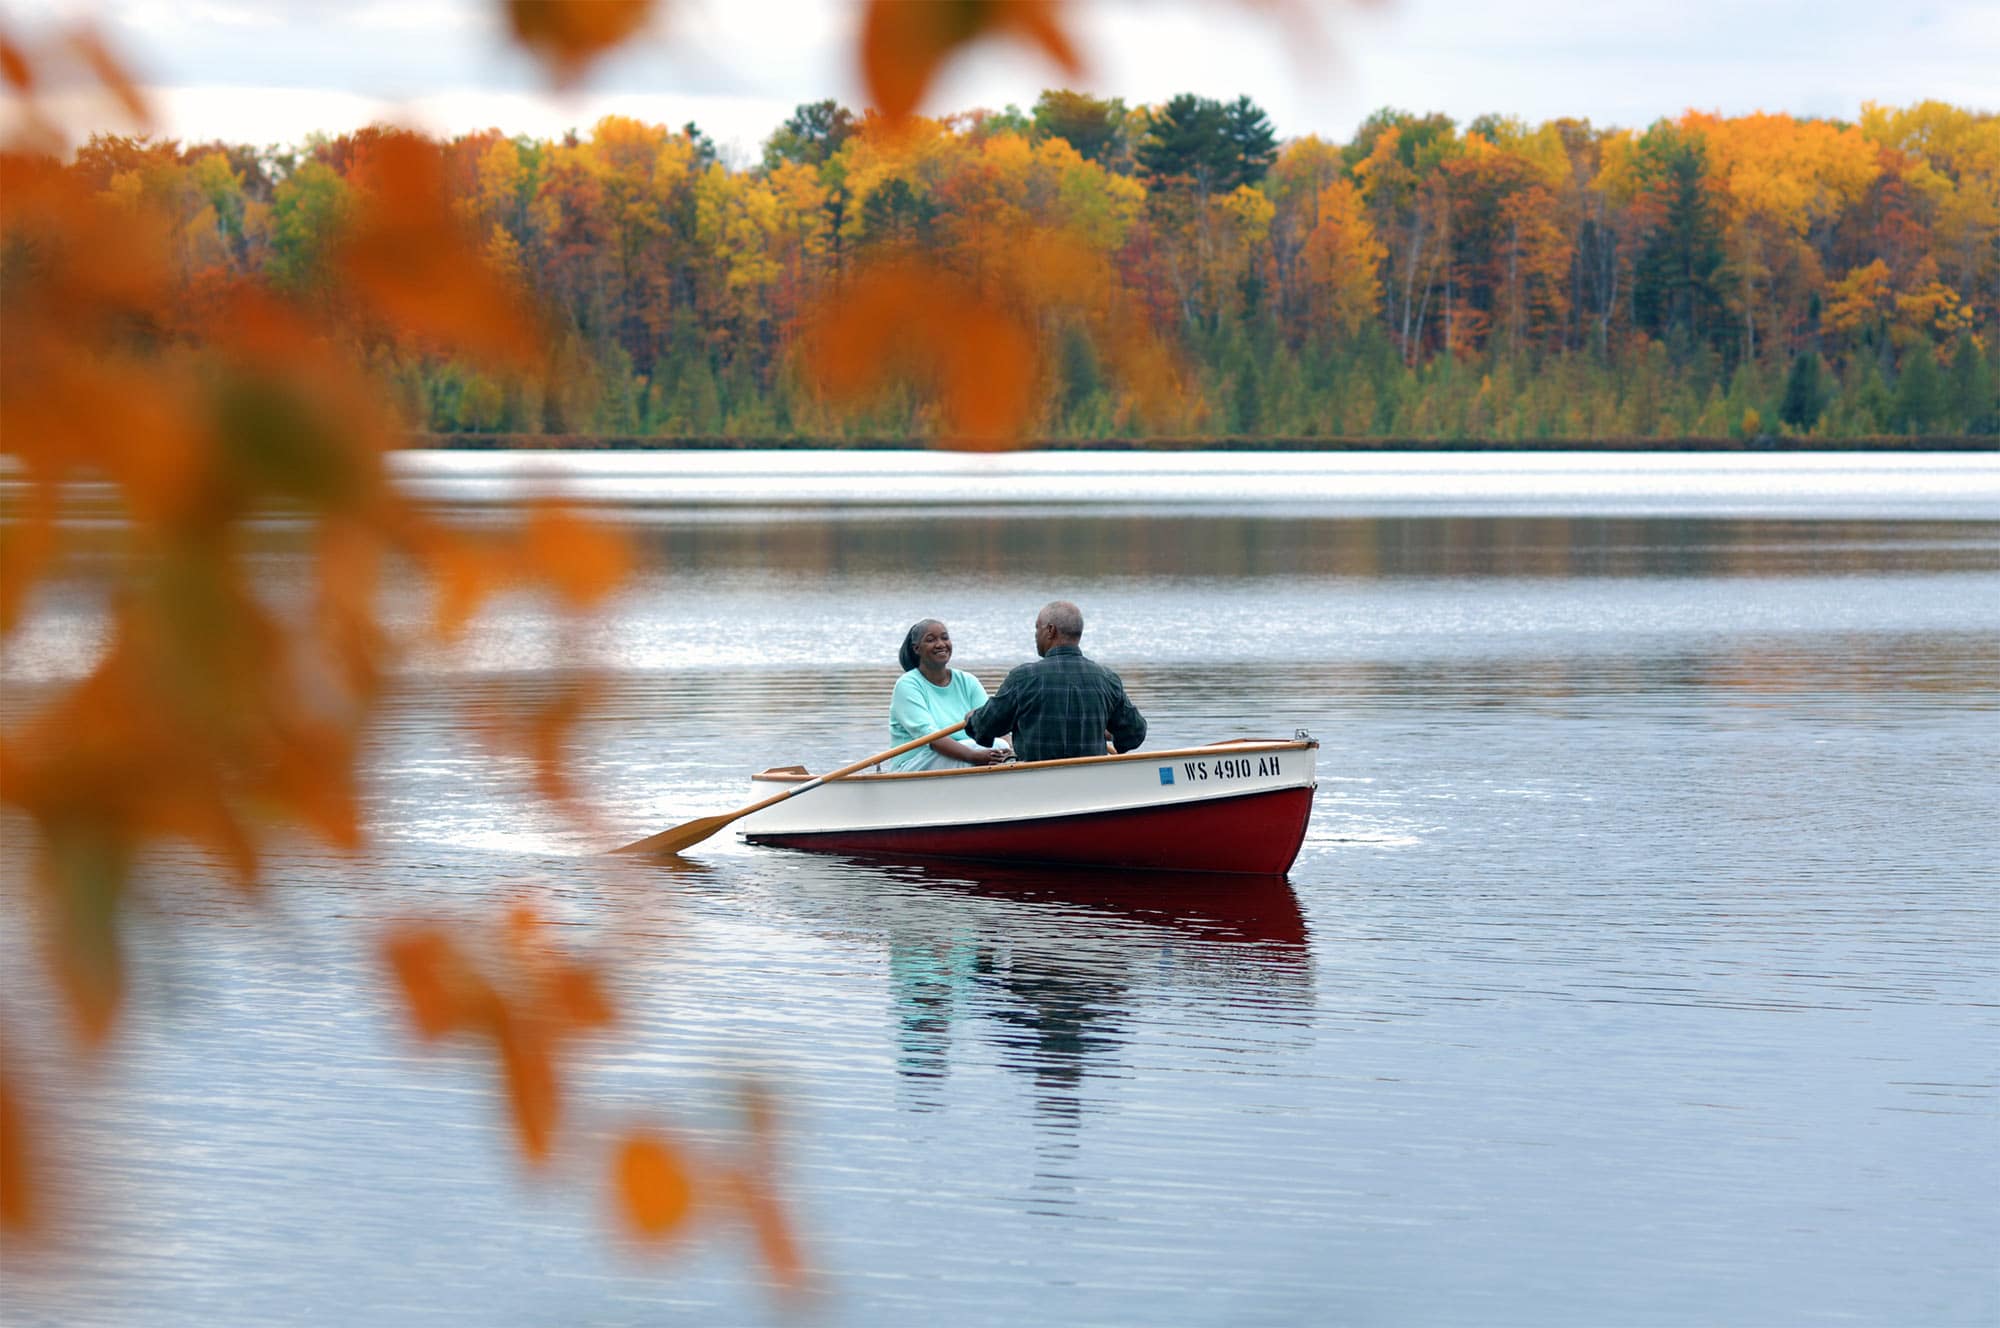 A couple in a boat on a lake.